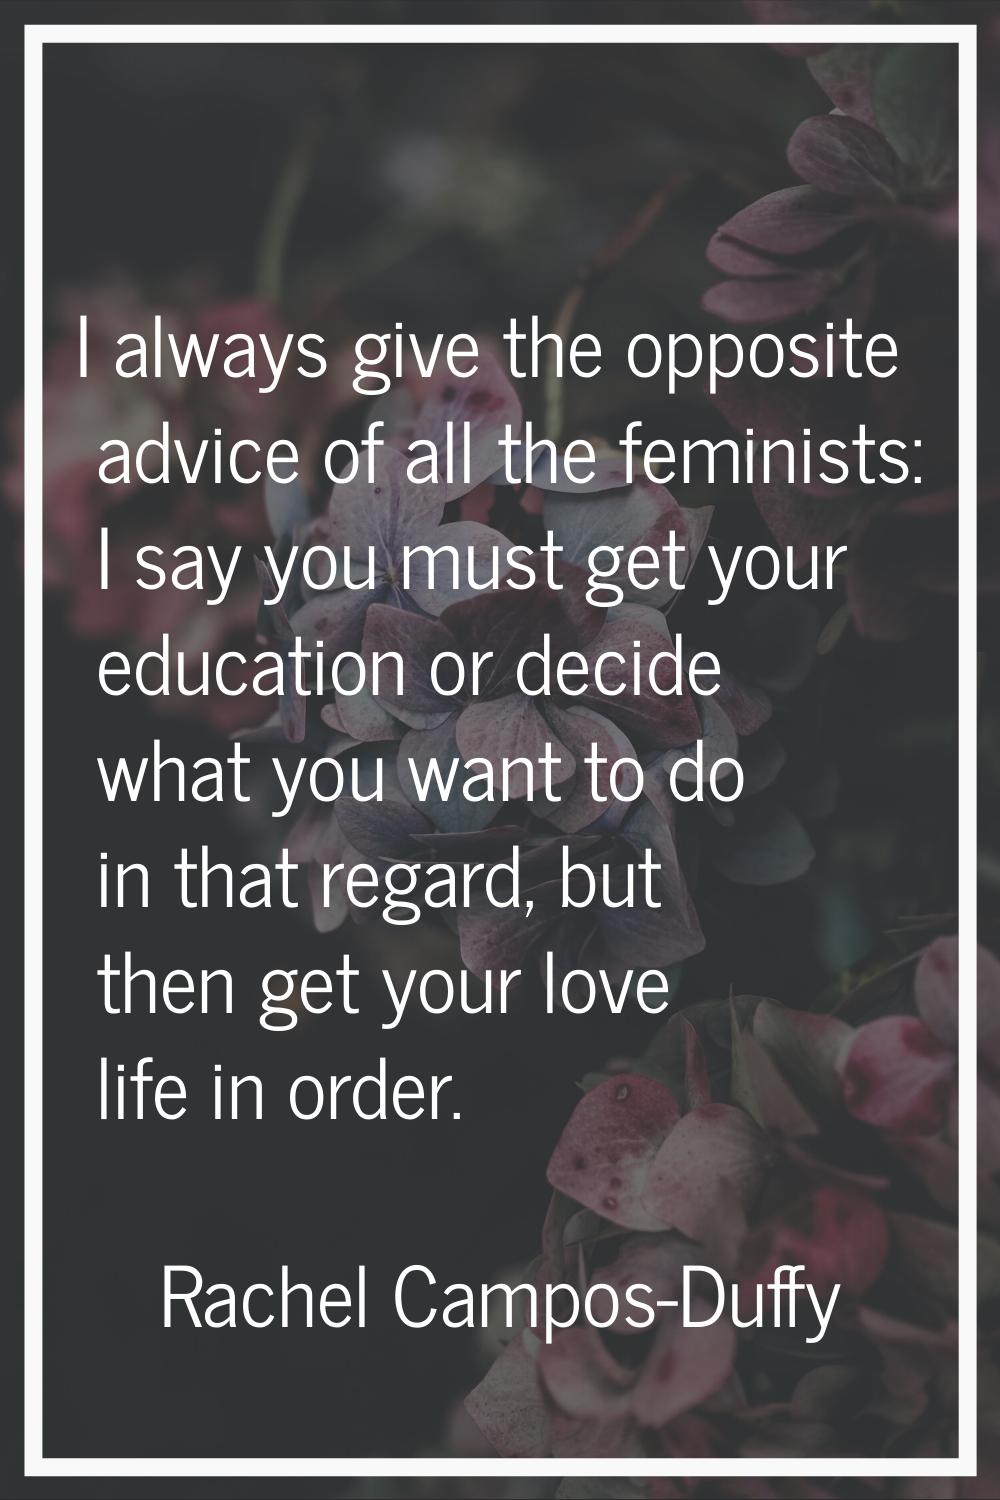 I always give the opposite advice of all the feminists: I say you must get your education or decide